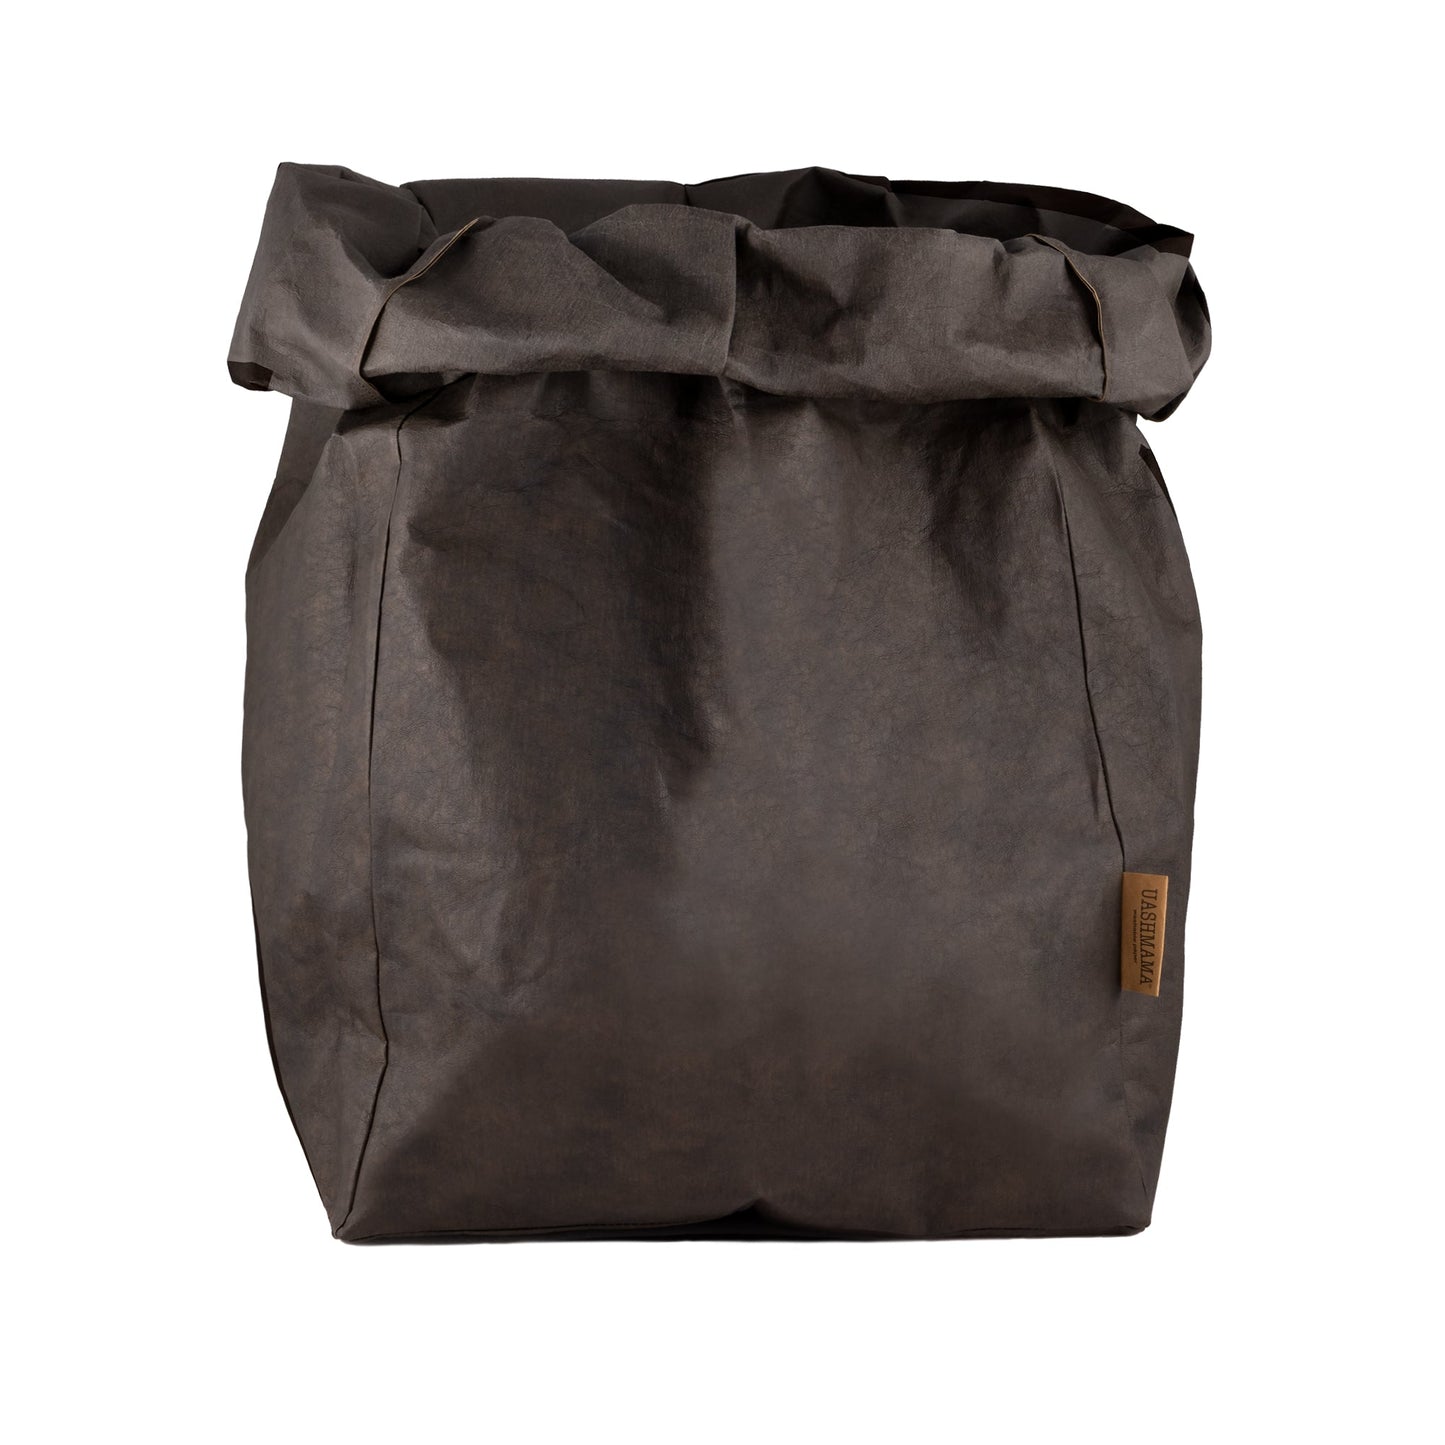 A washable paper bag is shown. The bag is rolled down at the top and features a UASHMAMA logo label on the bottom left corner. The bag pictured is the gigantic size in dark brown.